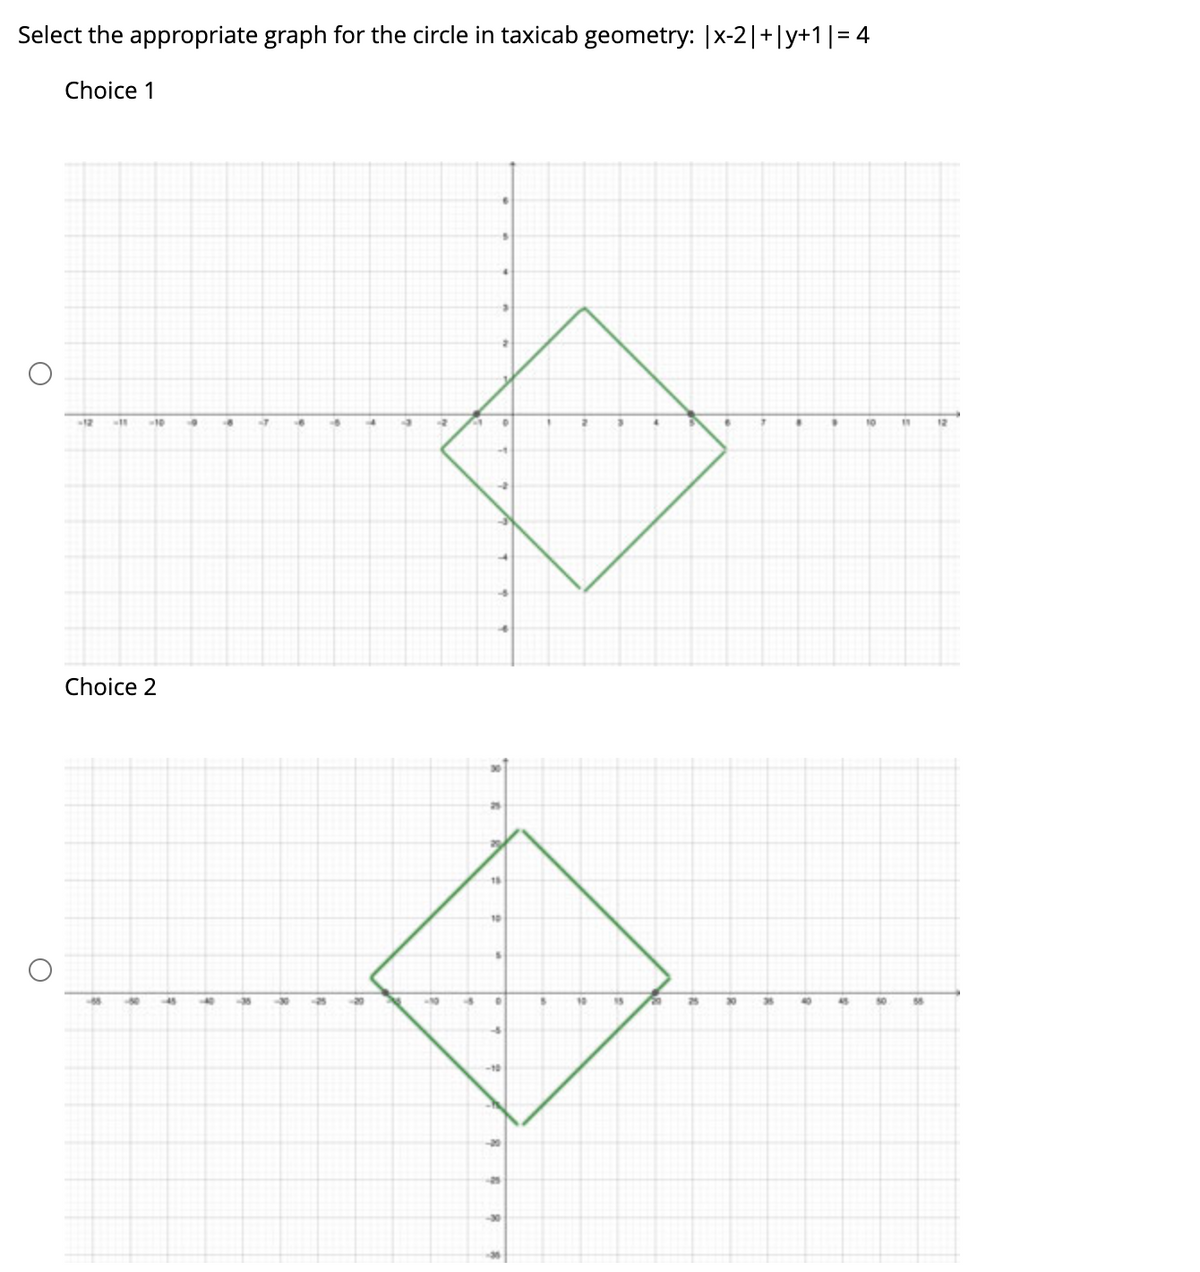 Select the appropriate graph for the circle in taxicab geometry: |x-2|+|y+1|= 4
Choice 1
12
-10
10
12
Choice 2
25
20
15
10
45
-30
10
15
26
30
36
50
-10
